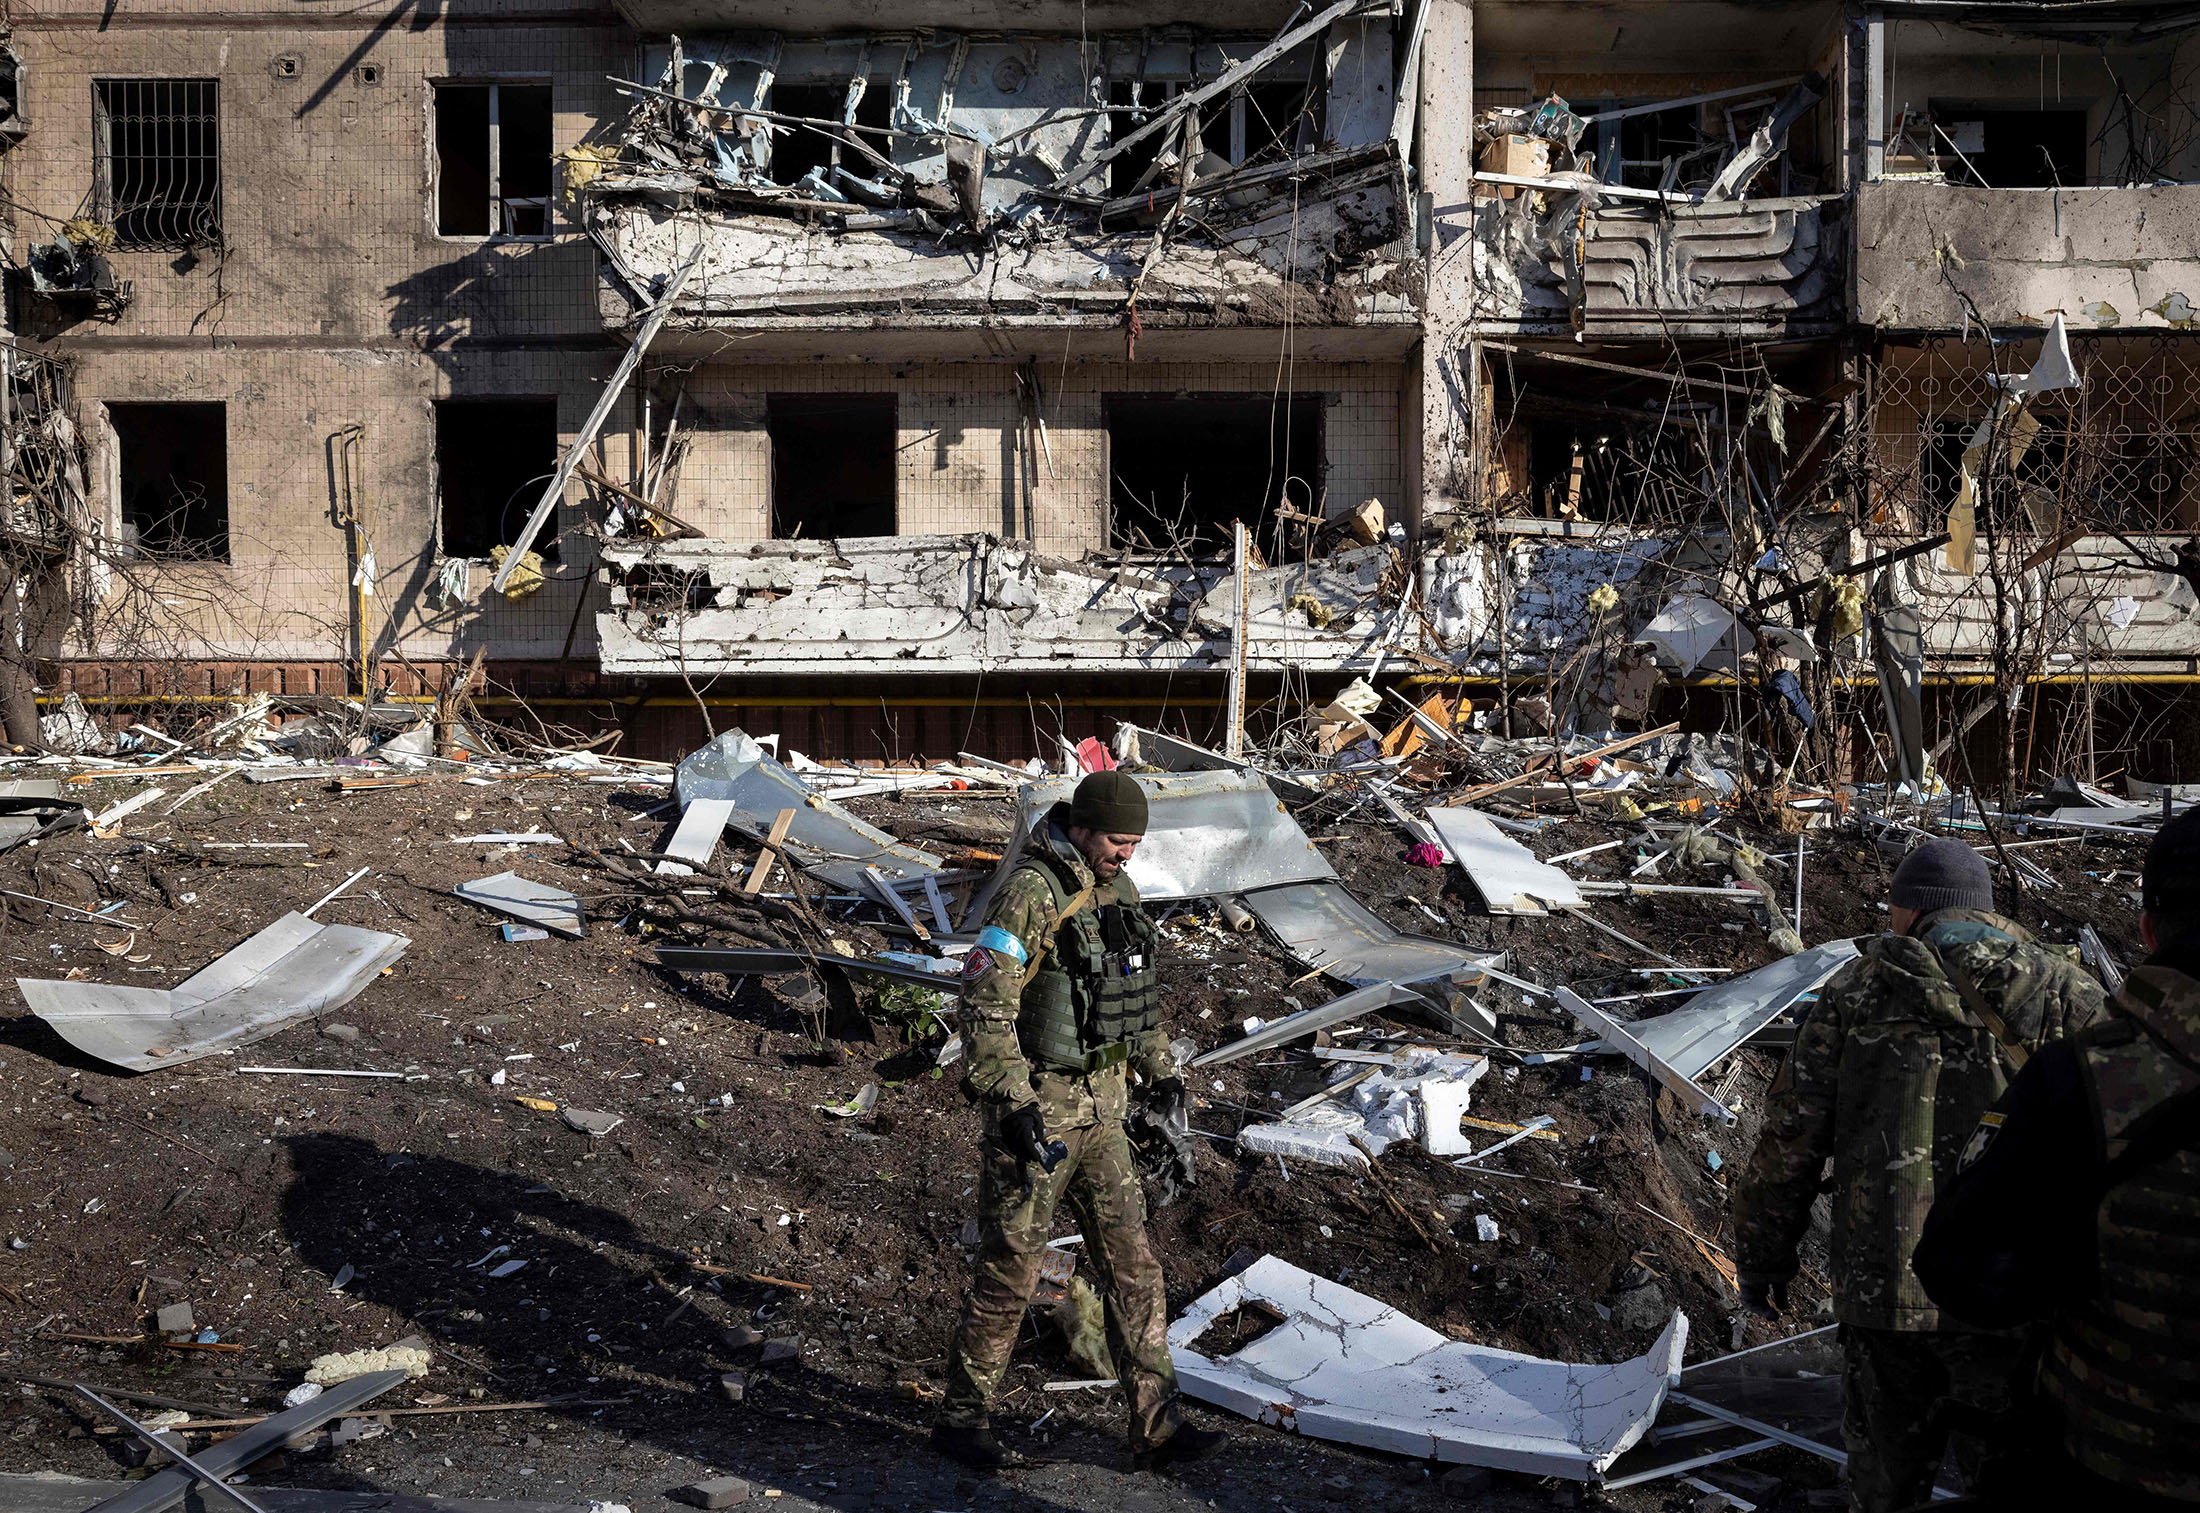 A Ukraine soldier inspects the rubble of a destroyed apartment building in Kyiv on March 15.